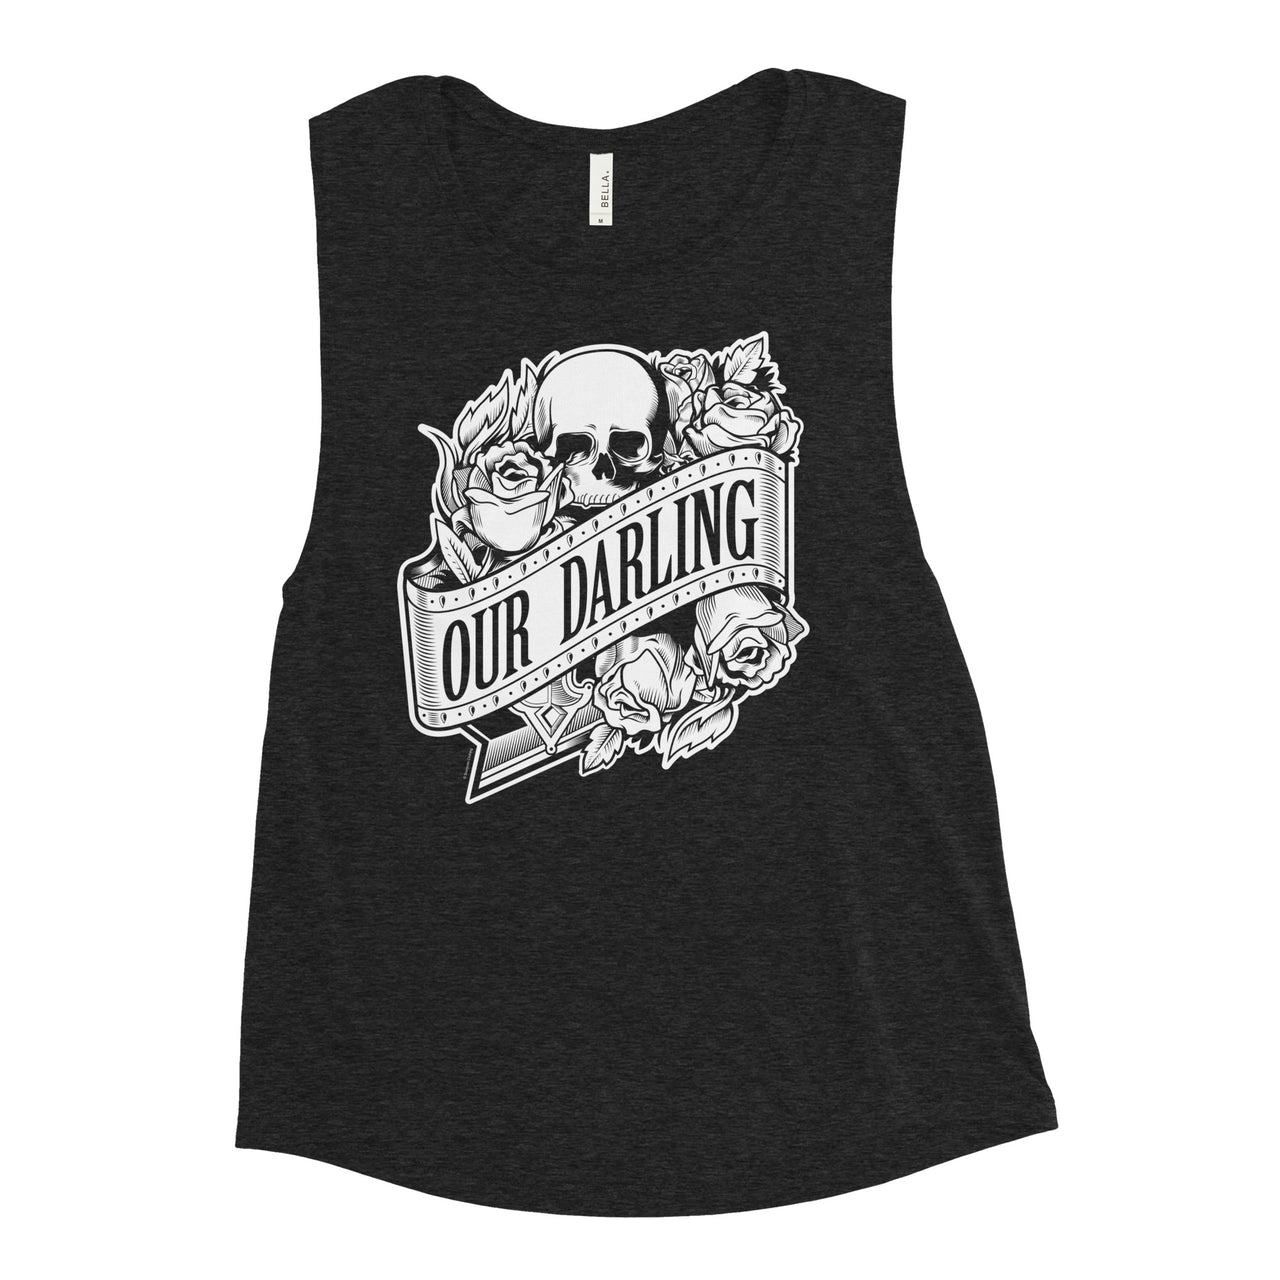 SOURPUSS OUR DARLING MUSCLE TANK TOP